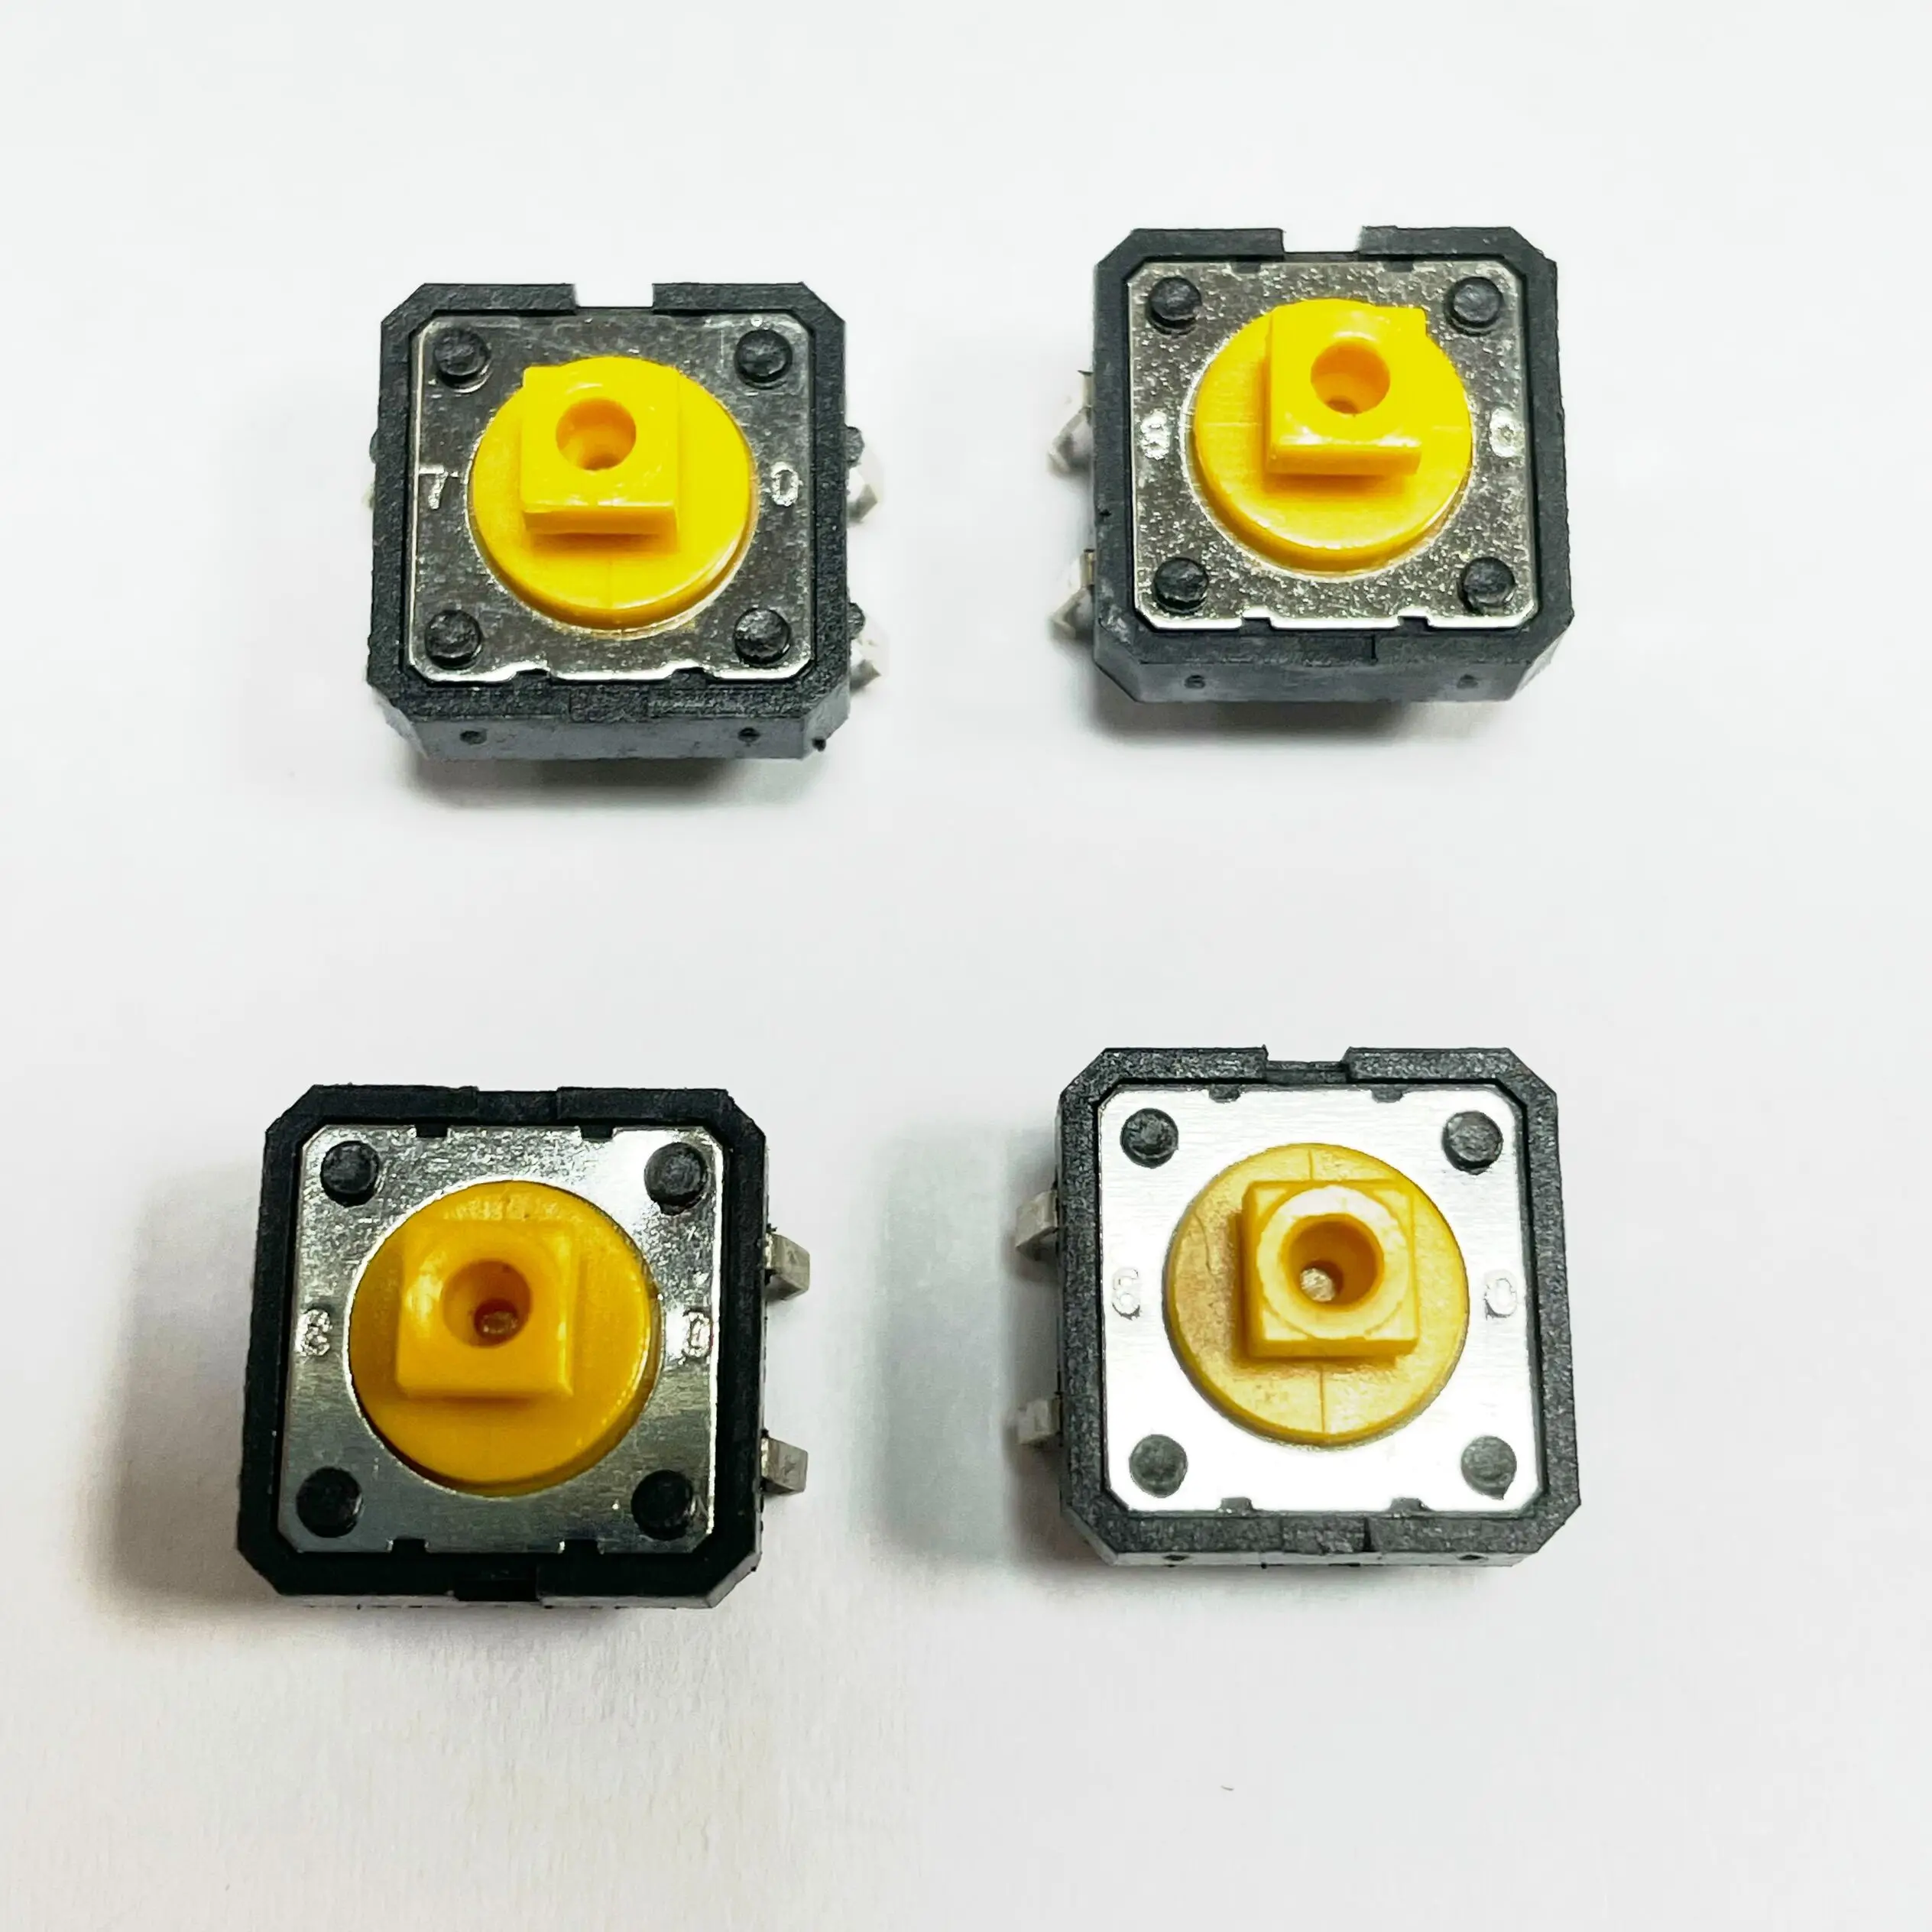 5PCS/LOT B3F-4055 12x12x7.3 mm Tactile Switches Yellow Square Push Button Tact Switch 12*12*7.3 mm Micro switch 10pcsimported from japan square head 6 6 7 3mm straight plug vertical micro motion tact key switch 4 pins 6x6x7 3